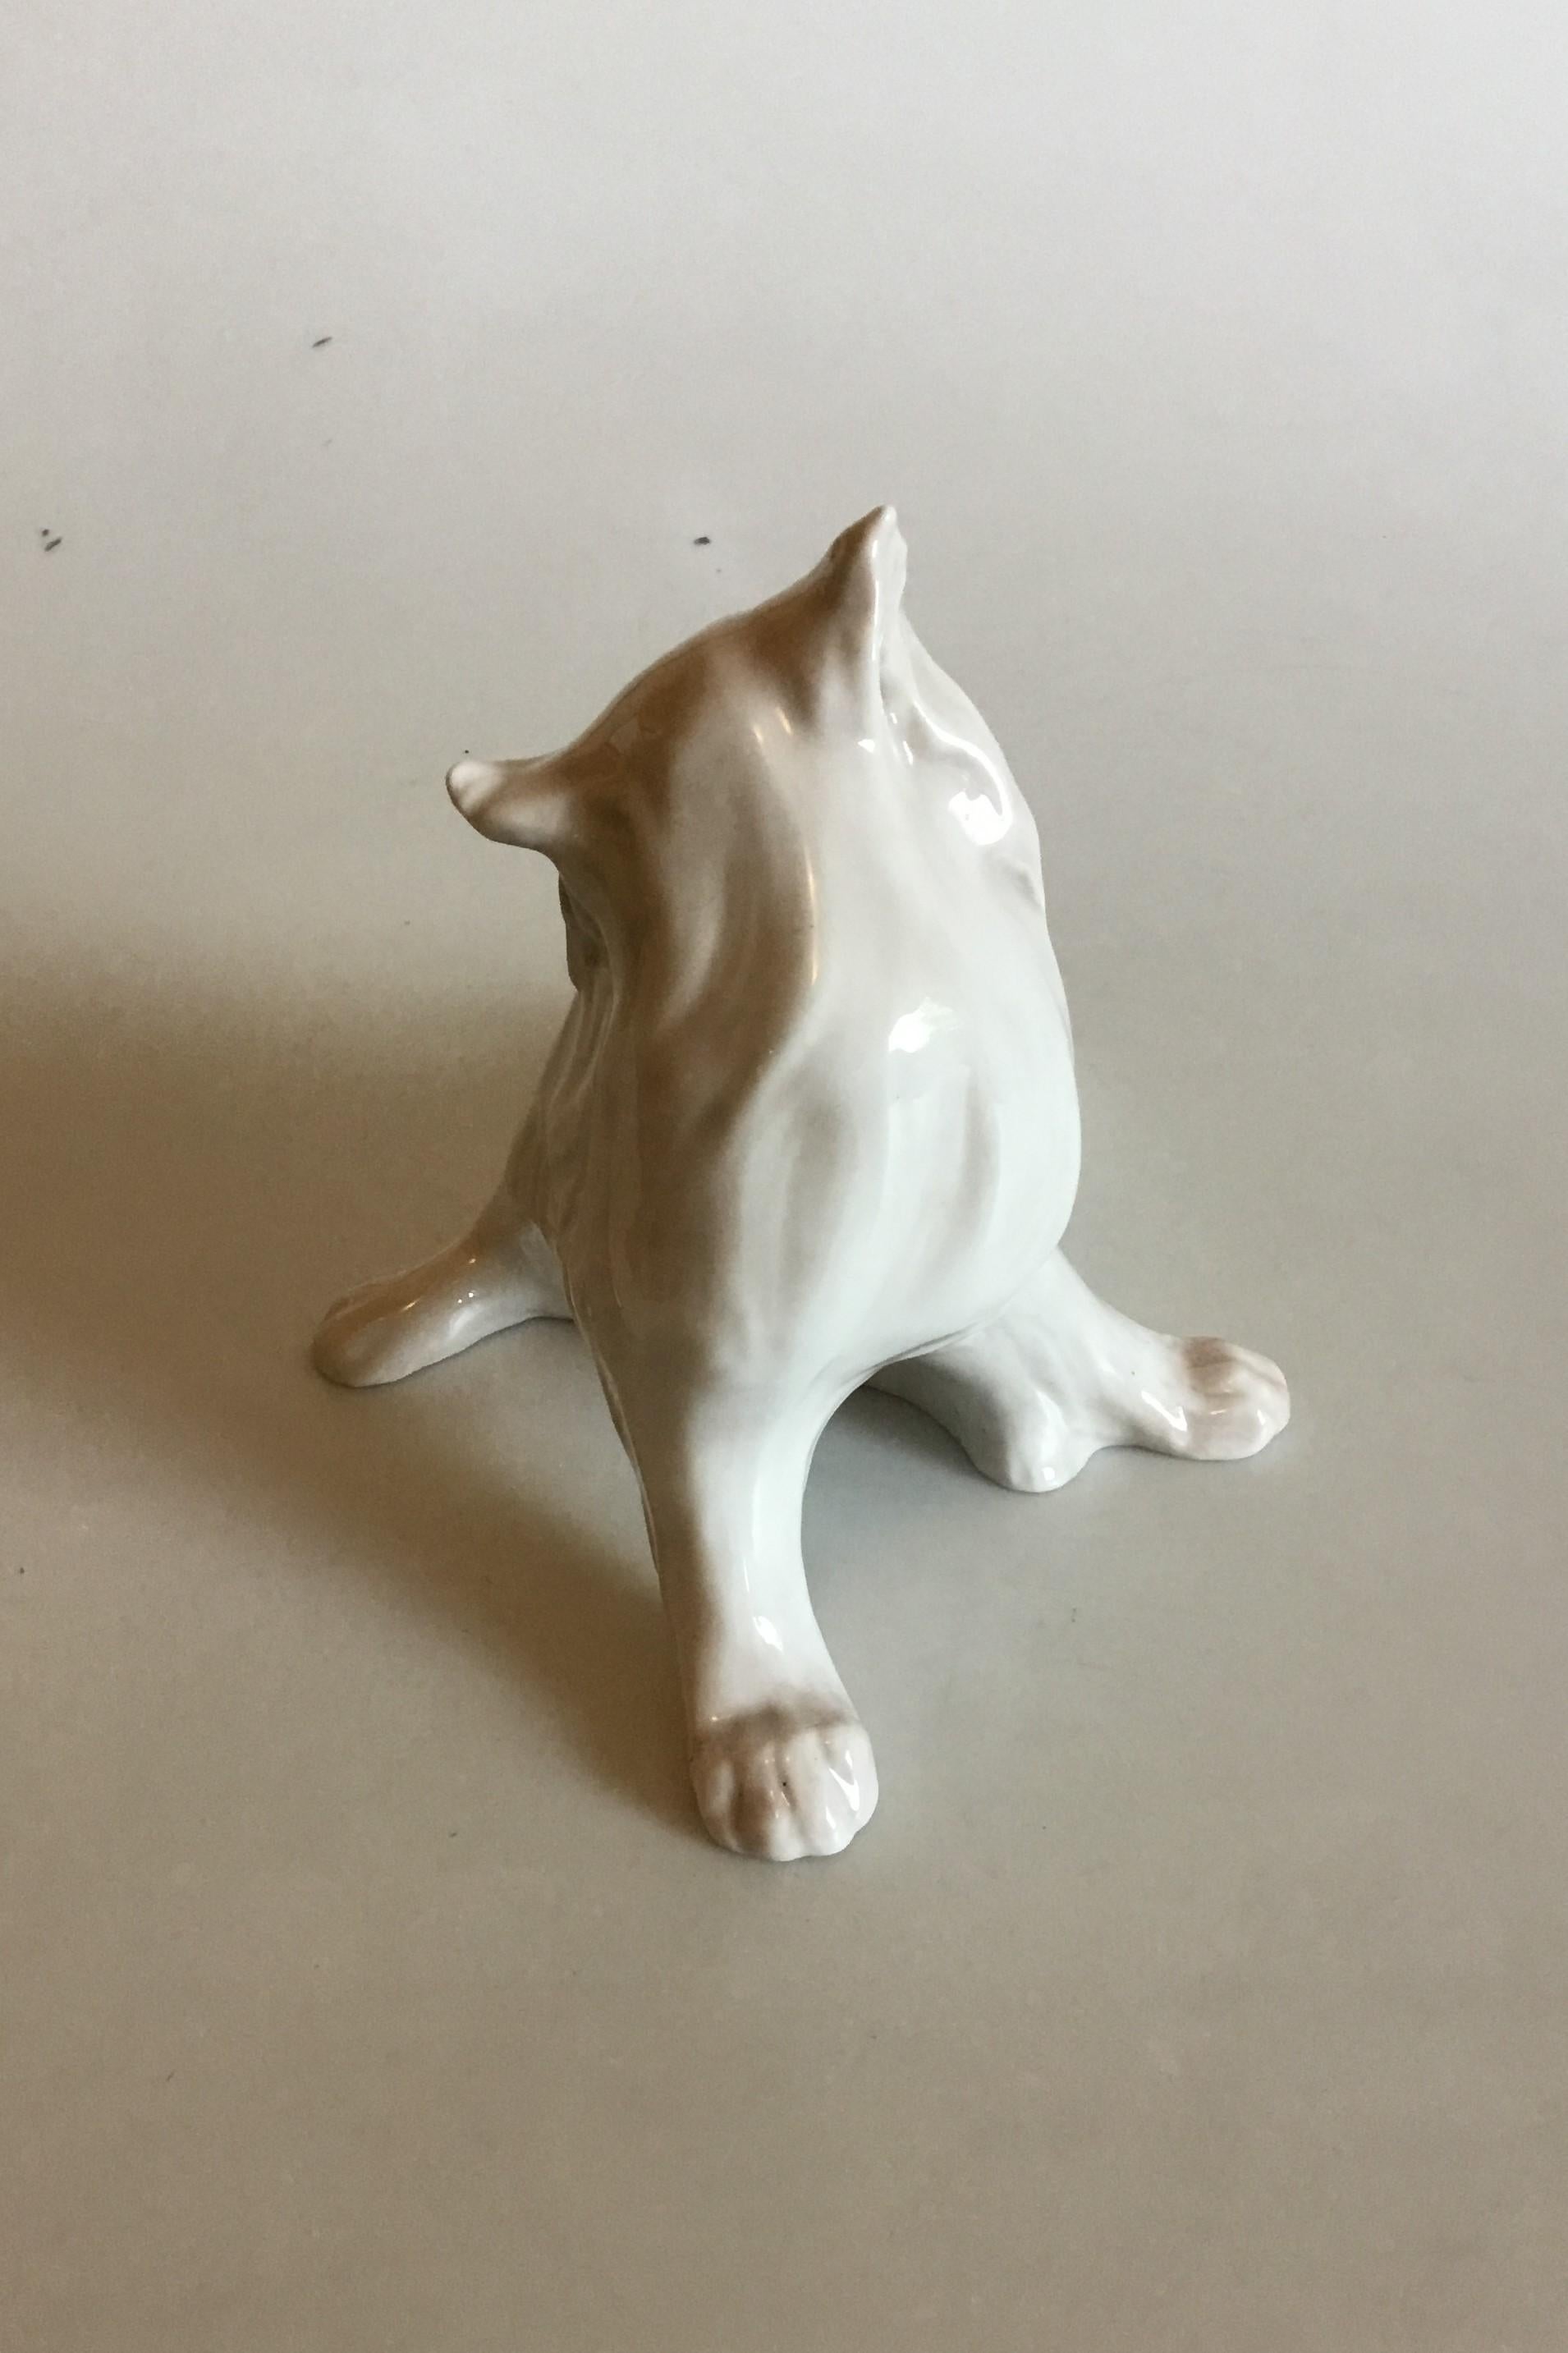 Royal Copenhagen figurine of cat designed by Knud Kyhn No 774.
Measures: 24 cm / 9 1/2 in. x 16 cm / 6 19/64 in.
1st Quality and is in perfect condition.